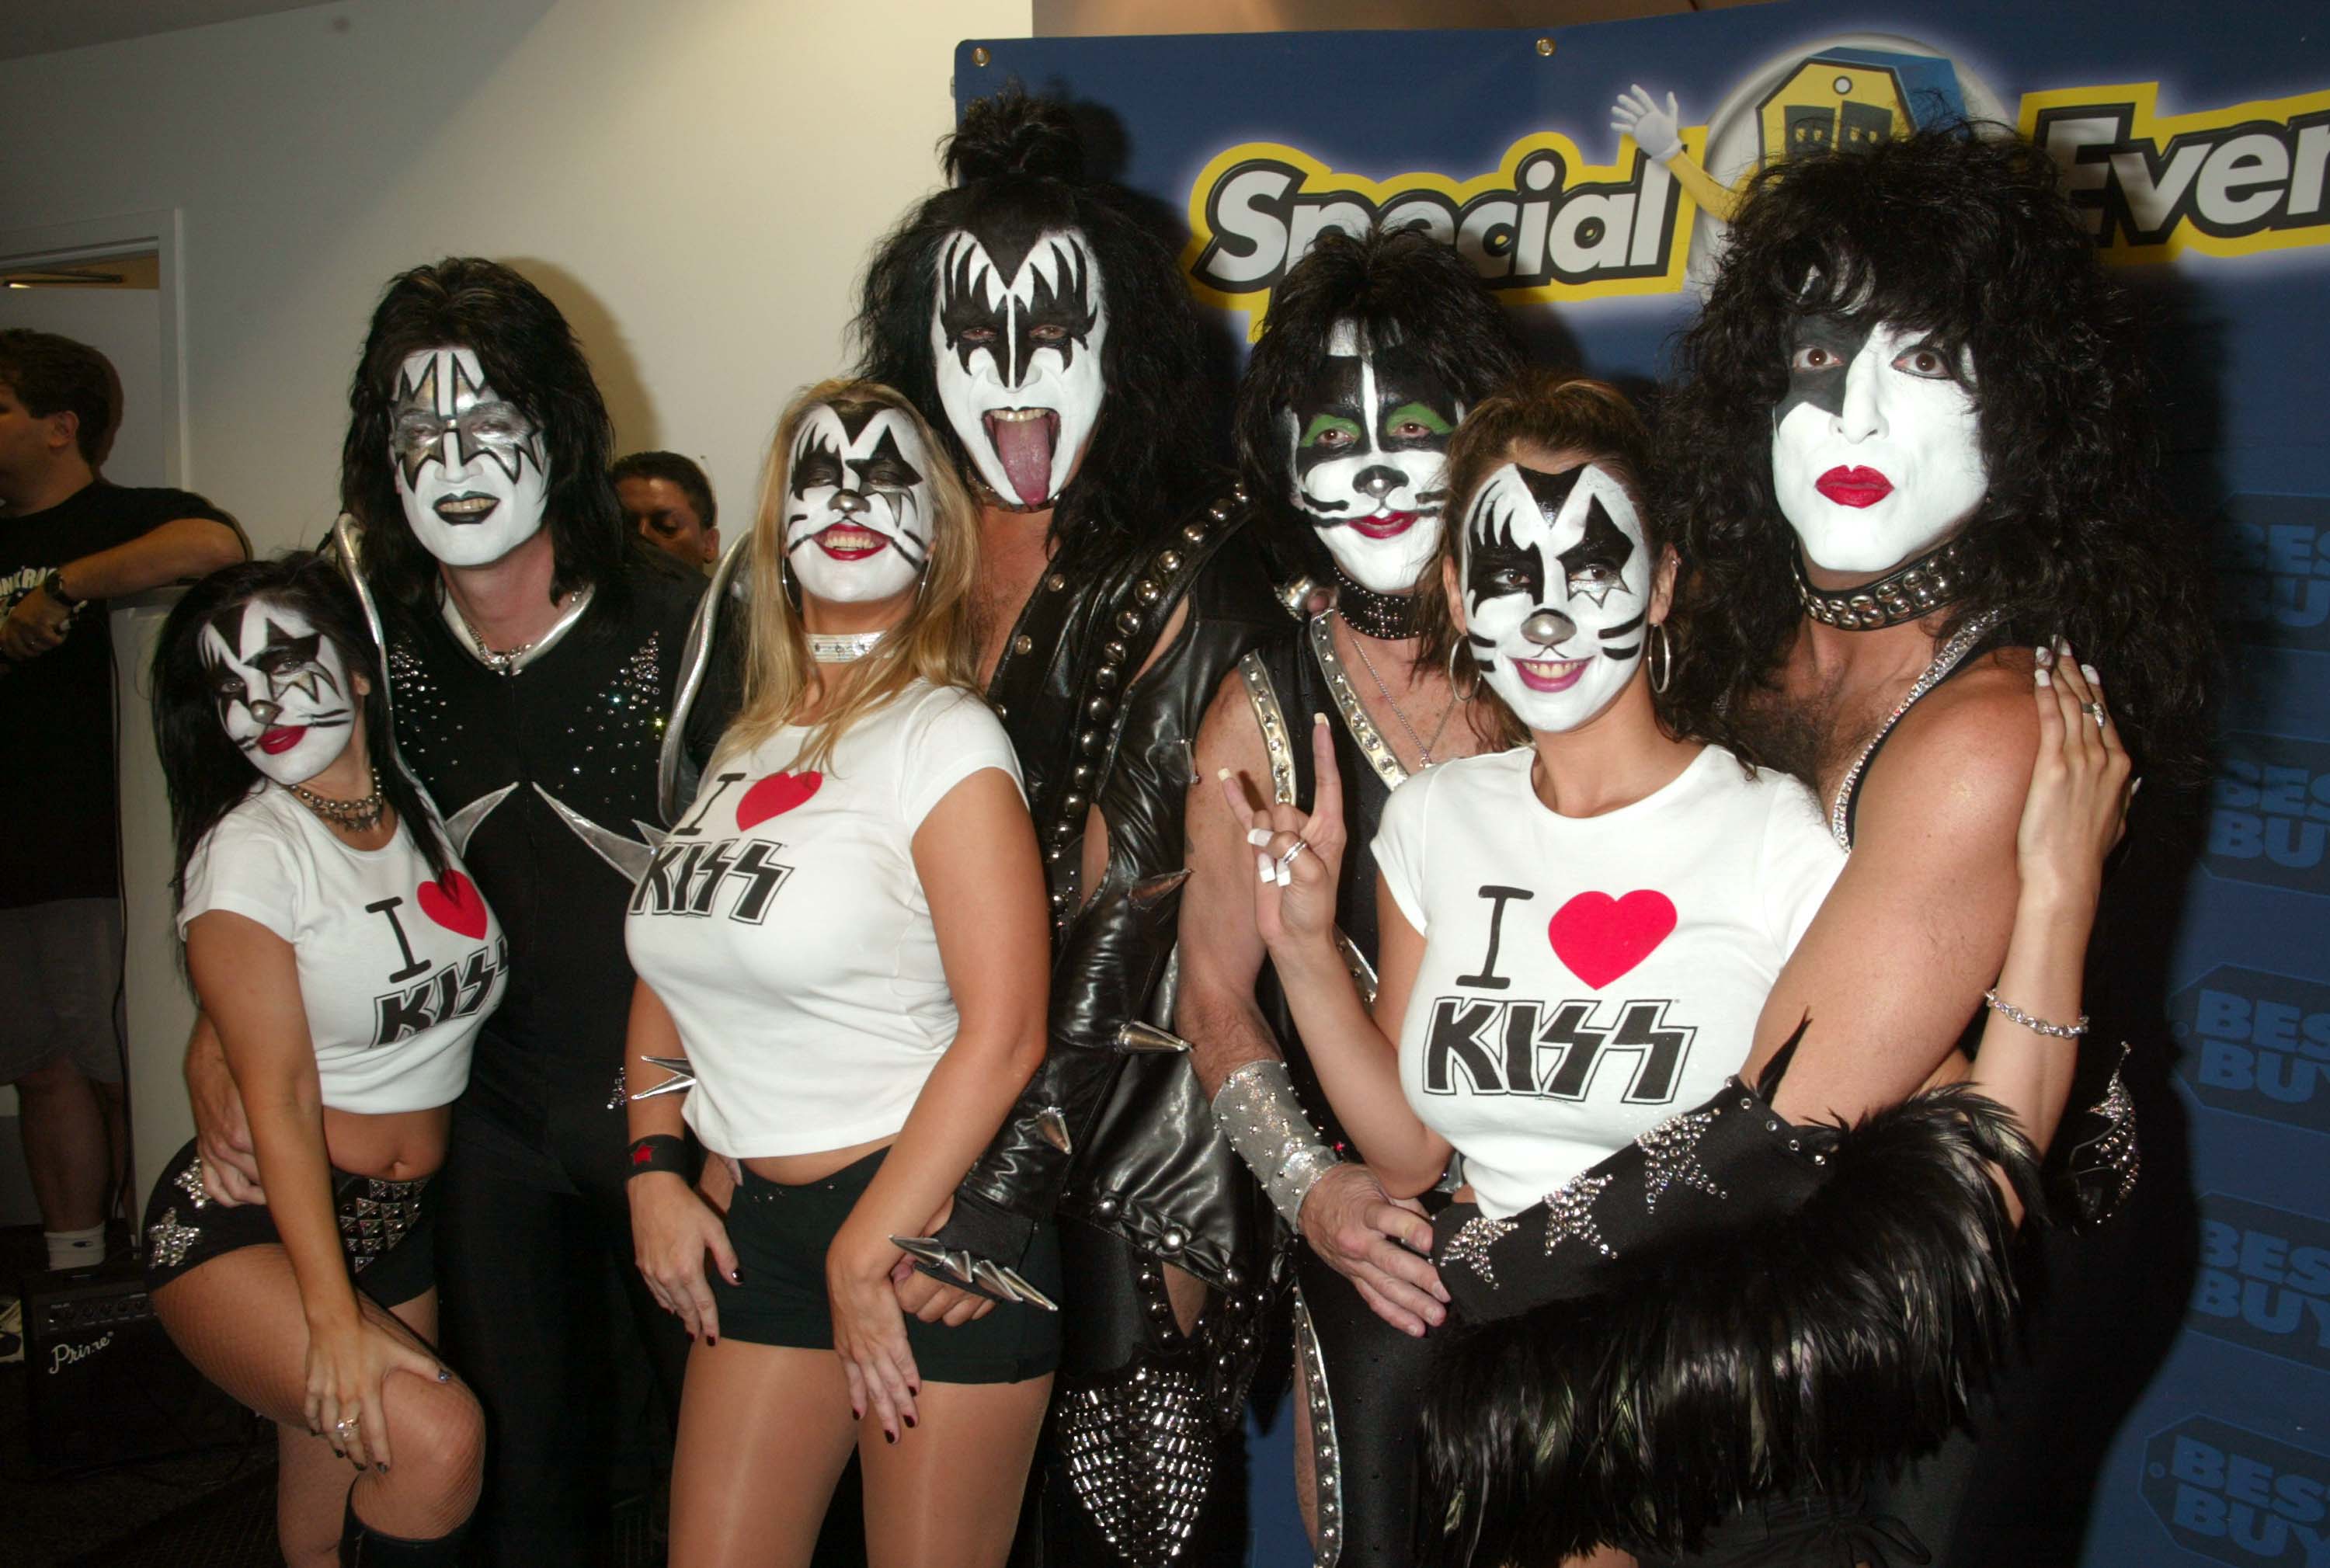 Tommy Thayer, Gene Simmons, Peter Criss and Paul Stanley of Kiss with fans in makeup